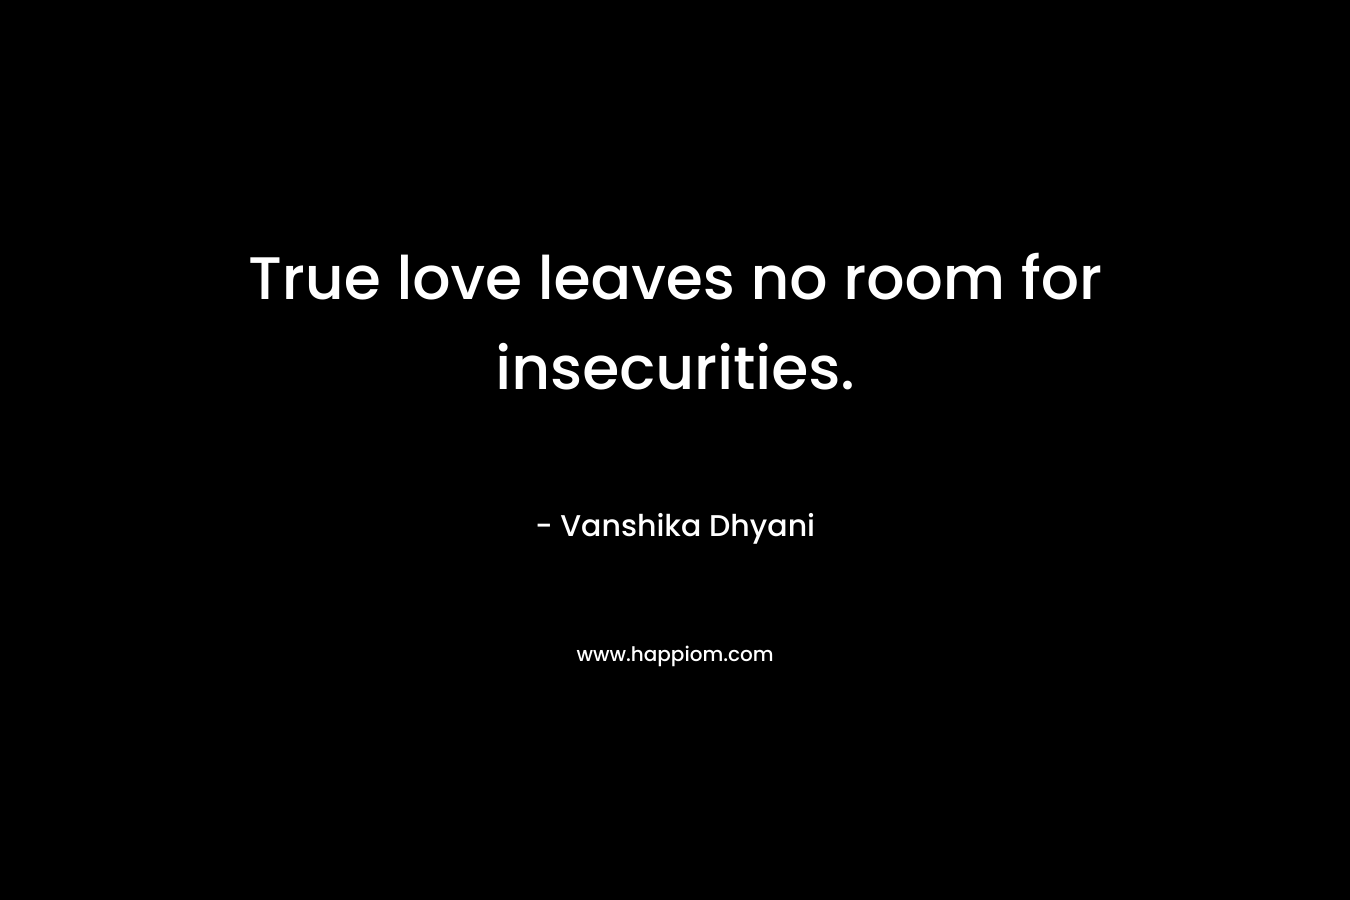 True love leaves no room for insecurities.